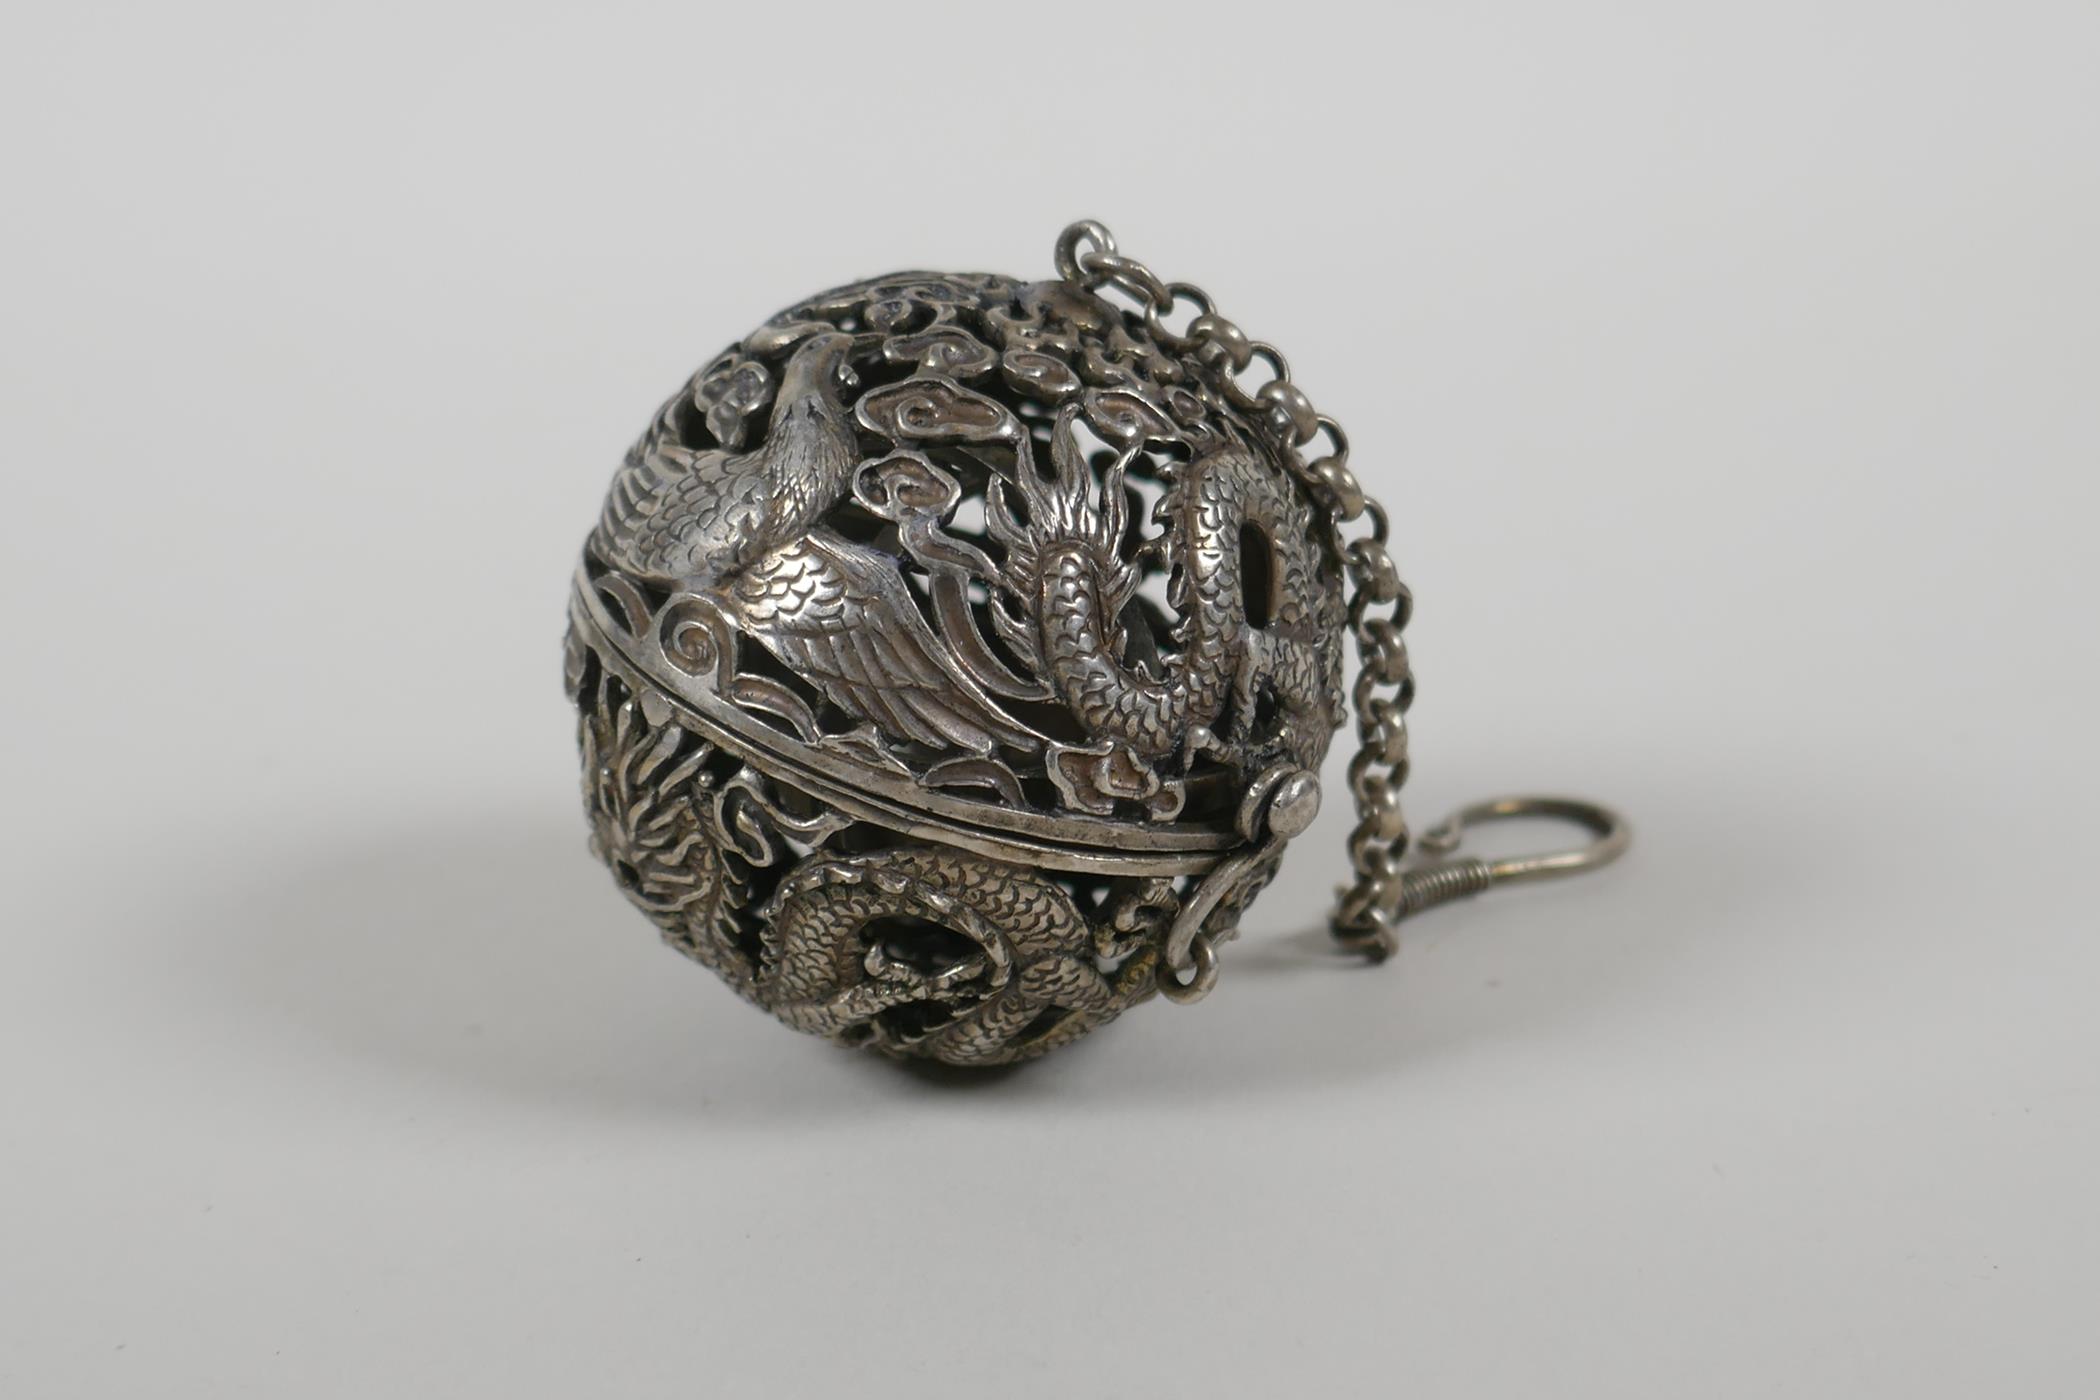 A Chinese white metal pierced ball incense burner, with a gimbal mouted reservoir, 2" diameter